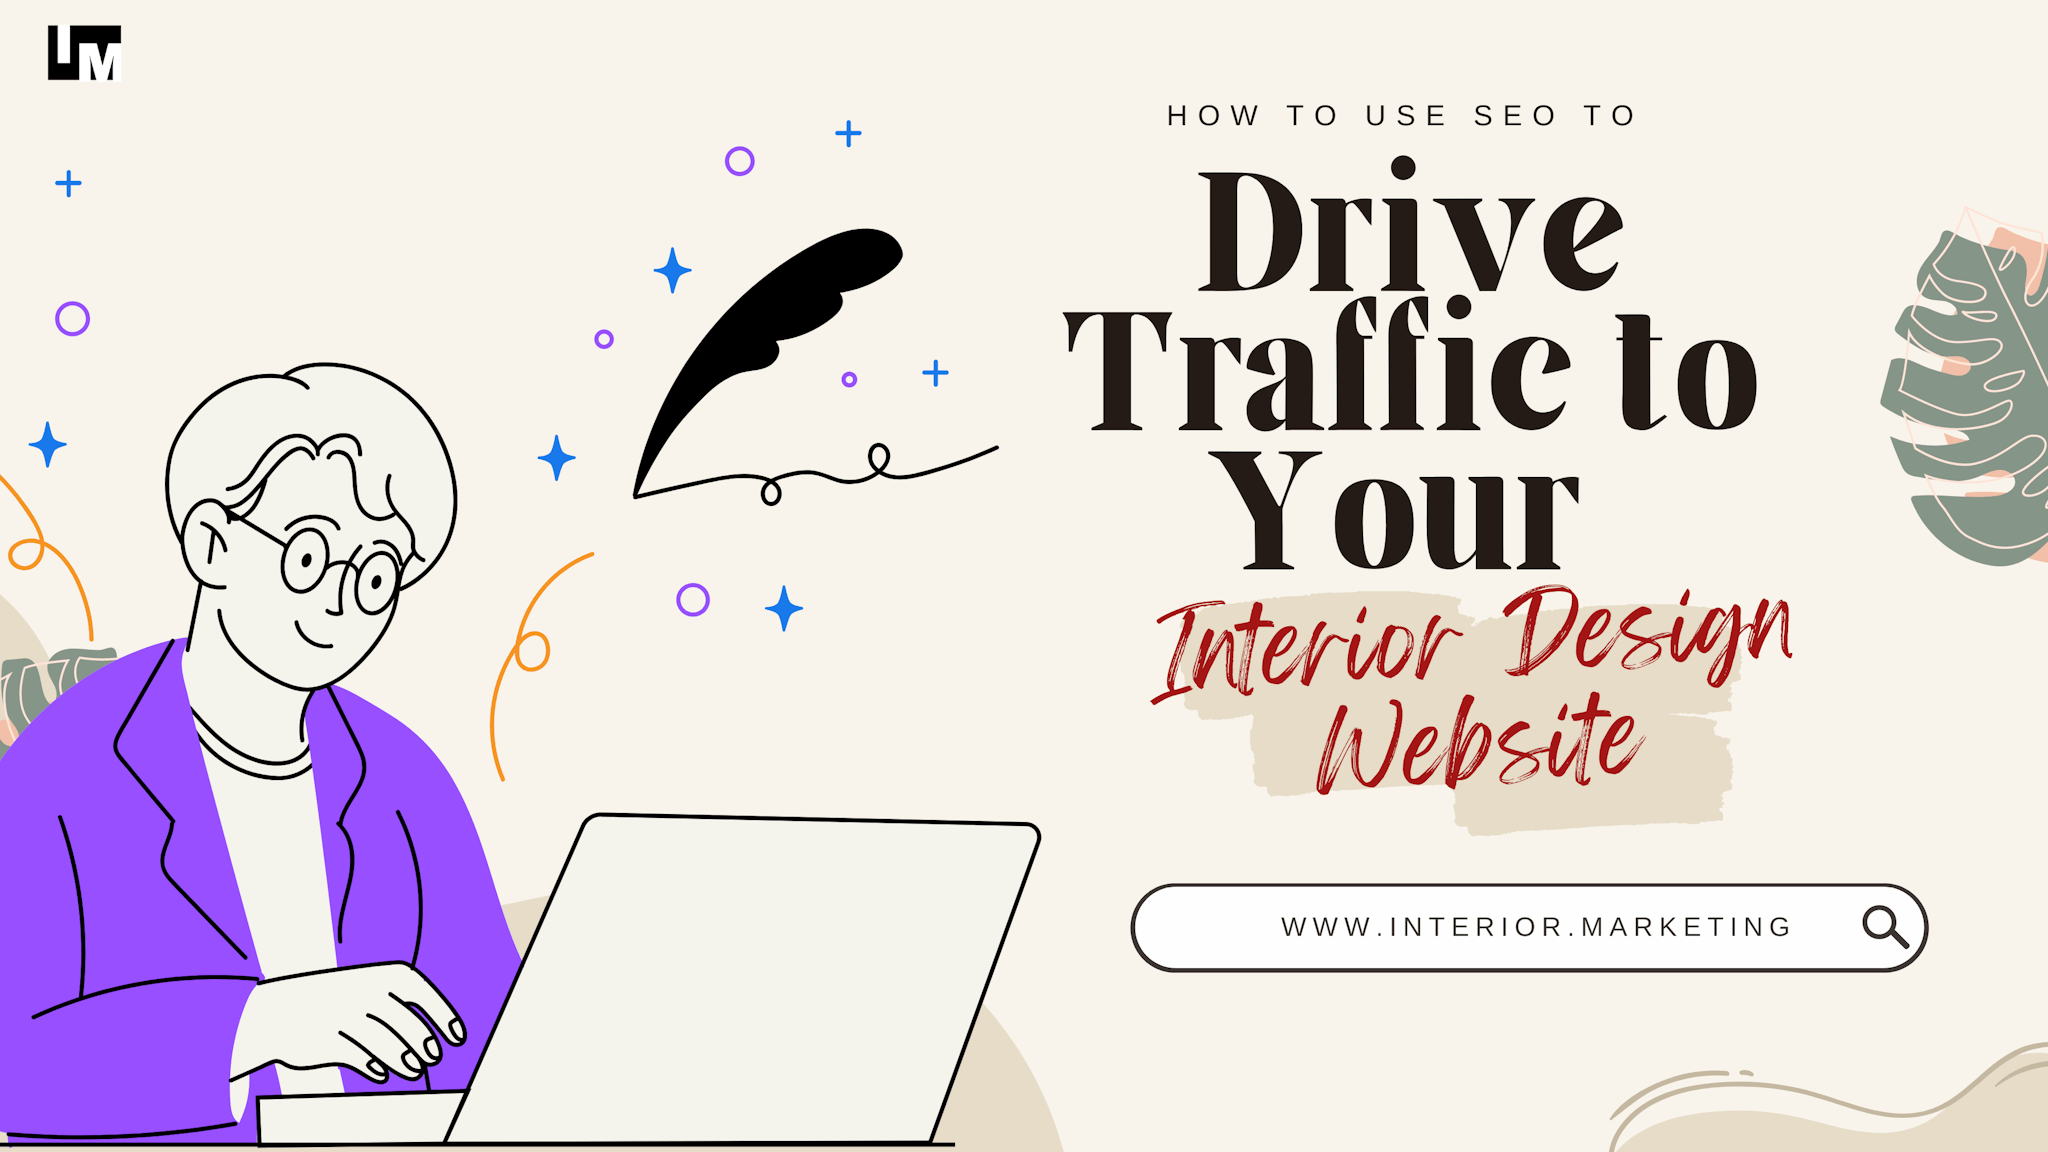 How to Use SEO to Drive Traffic to Your Interior Design Website